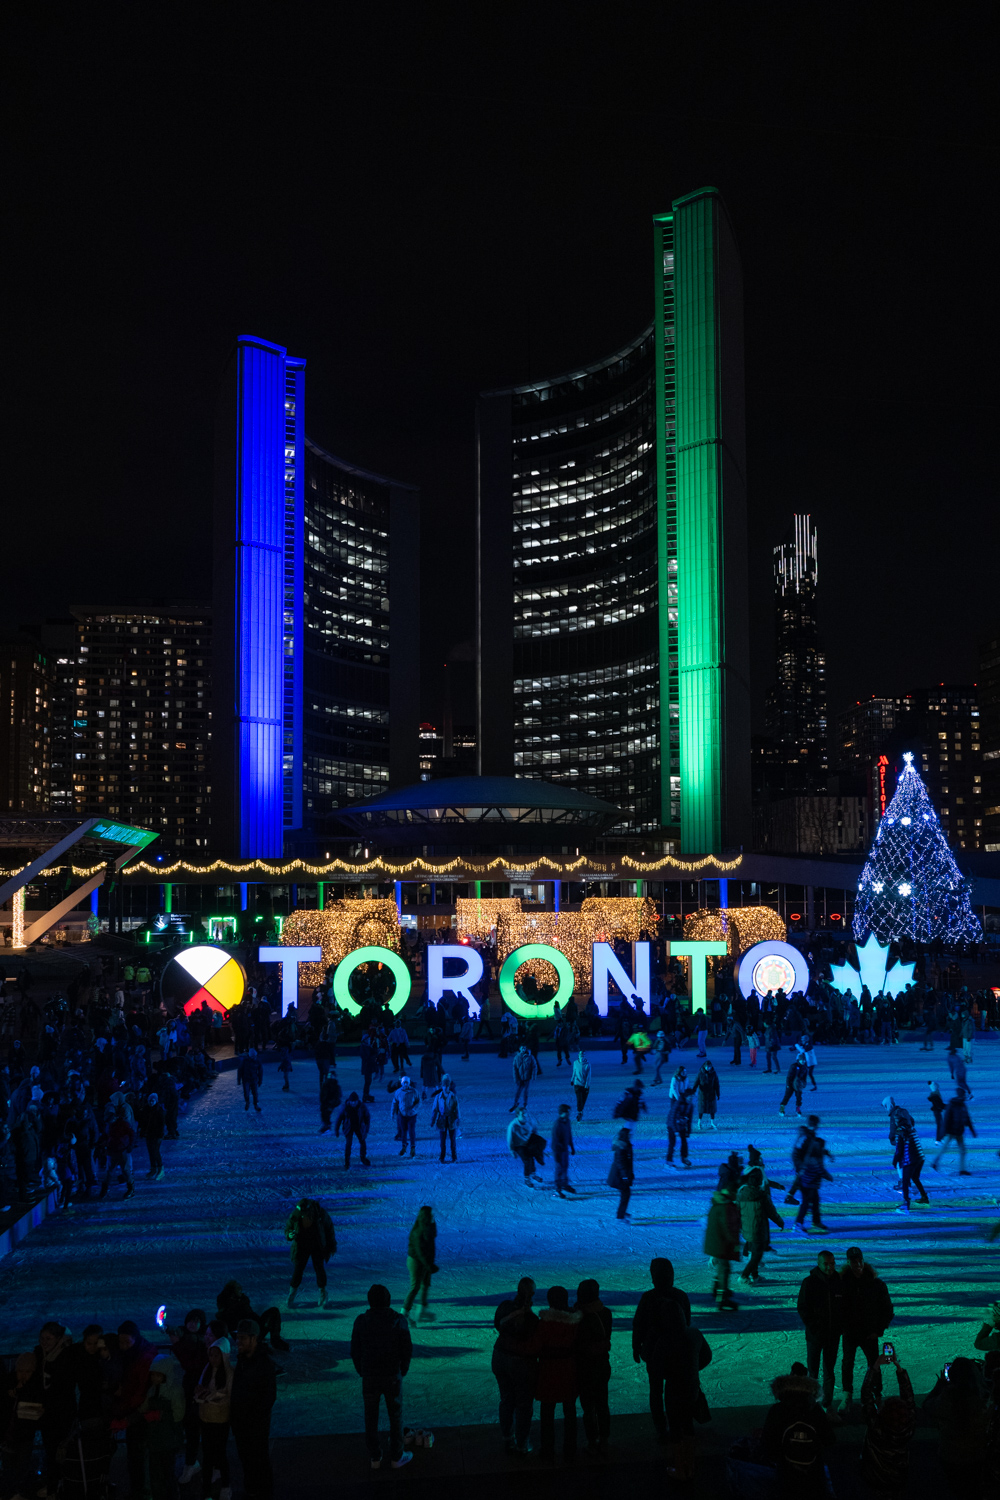 Outdoor skating rink with Toronto sign lit up, a giant Christmas tree and City Hall lit green and blue in the background.